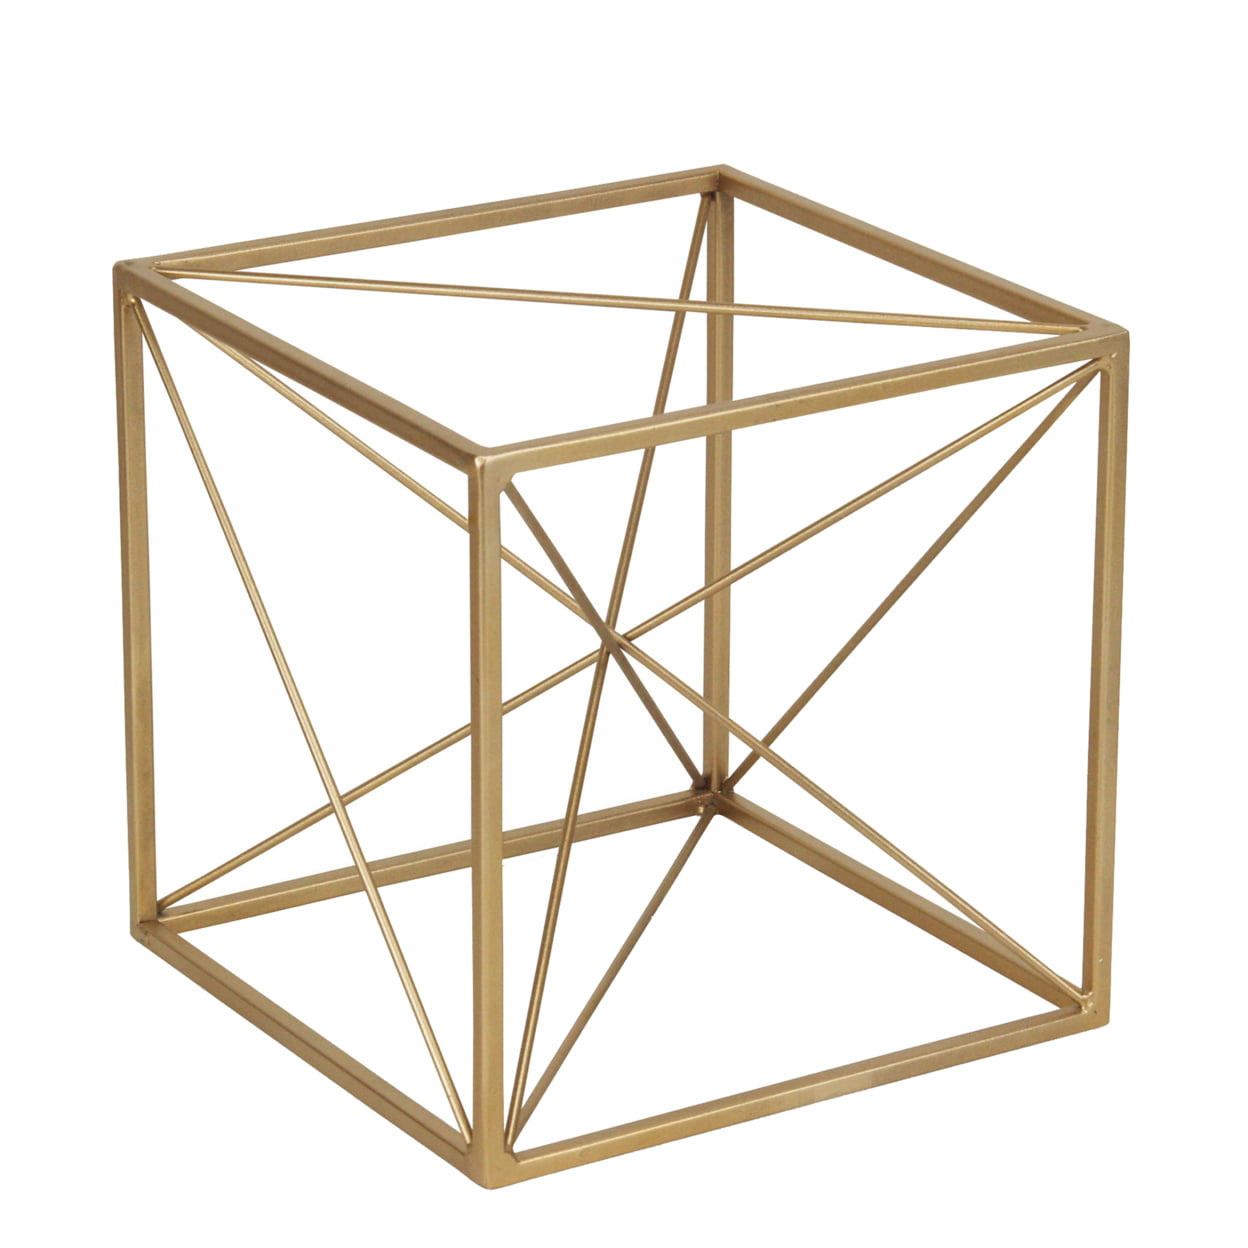 4738l Decorative Golden Cube With Abstract Center Design, Large